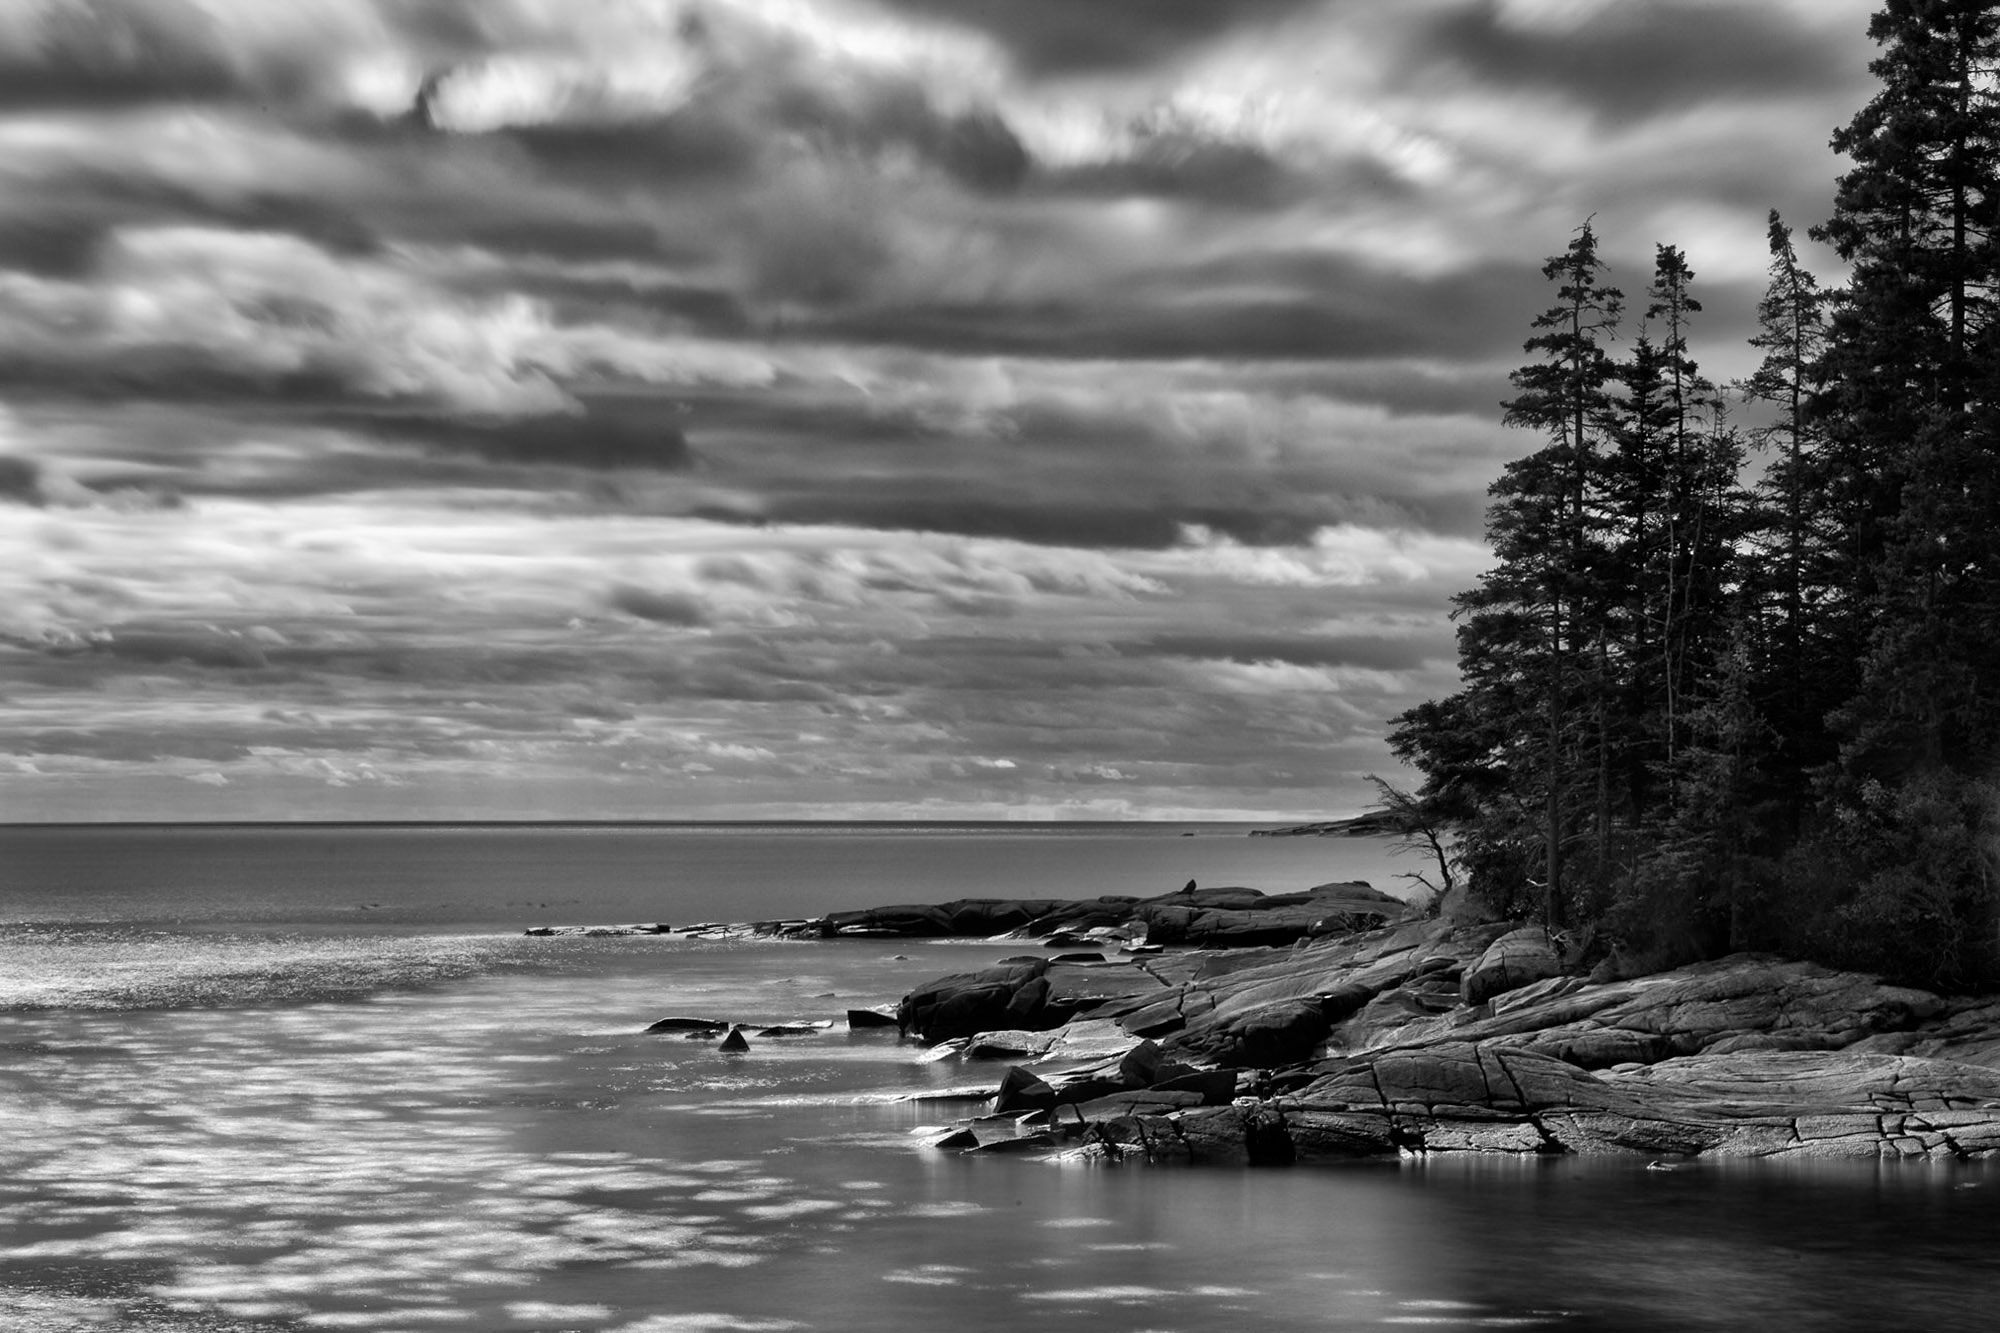 Passing storm along the bay in Acadian Maine-Schoodic